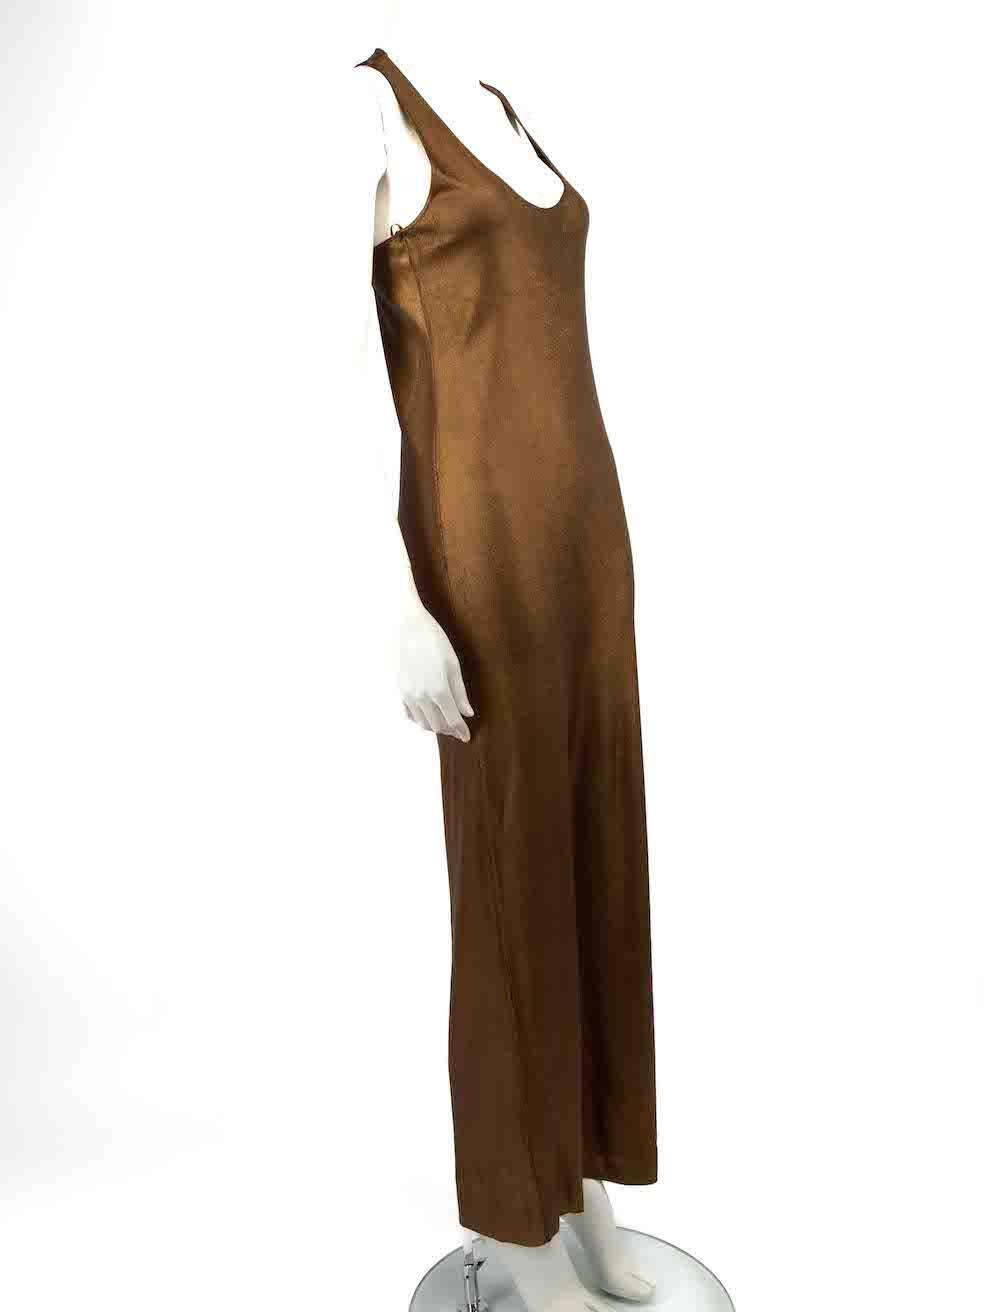 CONDITION is Very good. Minimal wear to dress is evident. One small mark to front waist of dress on this used Tom Ford designer resale item.
 
 
 
 Details
 
 
 Gold
 
 Viscose
 
 Dress
 
 Metallic coating
 
 Maxi
 
 Sleeveless
 
 Scoop neck
 
 
 
